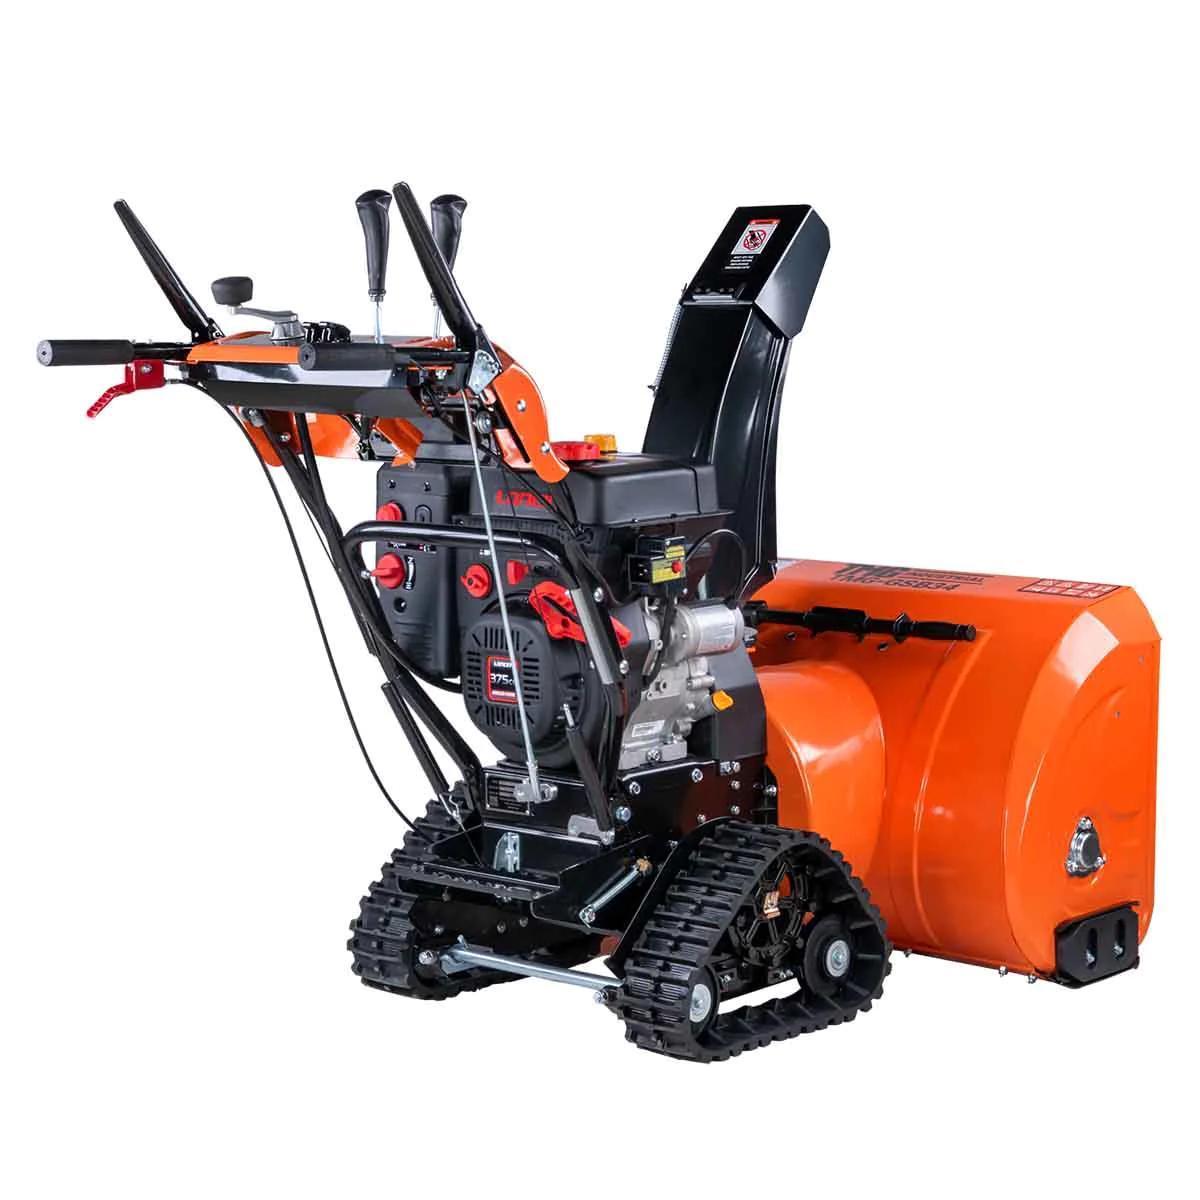 NEW SUPPORT EQUIPMENT NEW TMG Industrial 34'' Self-Propelled Gas-Powered Snow Blower, Dual-Stage,